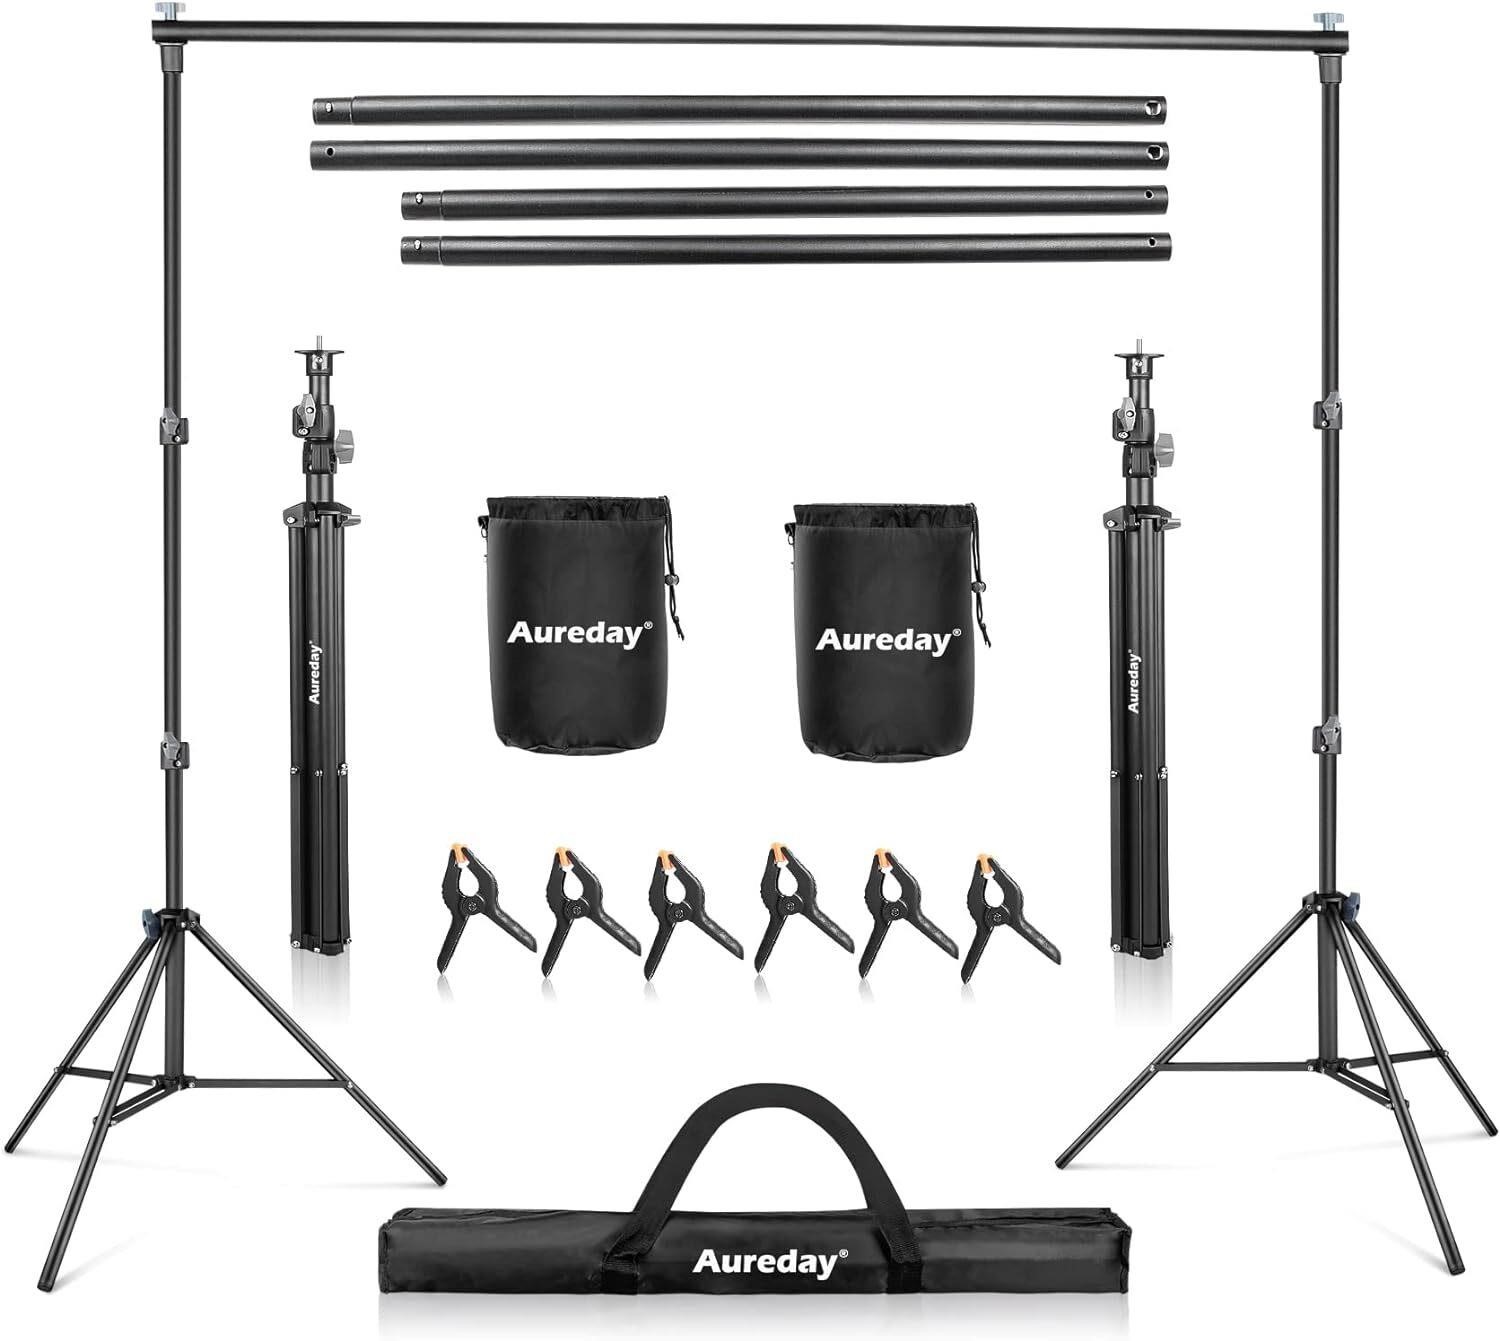 Aureday 10x7ft Photo Backdrop Stand with Accs.